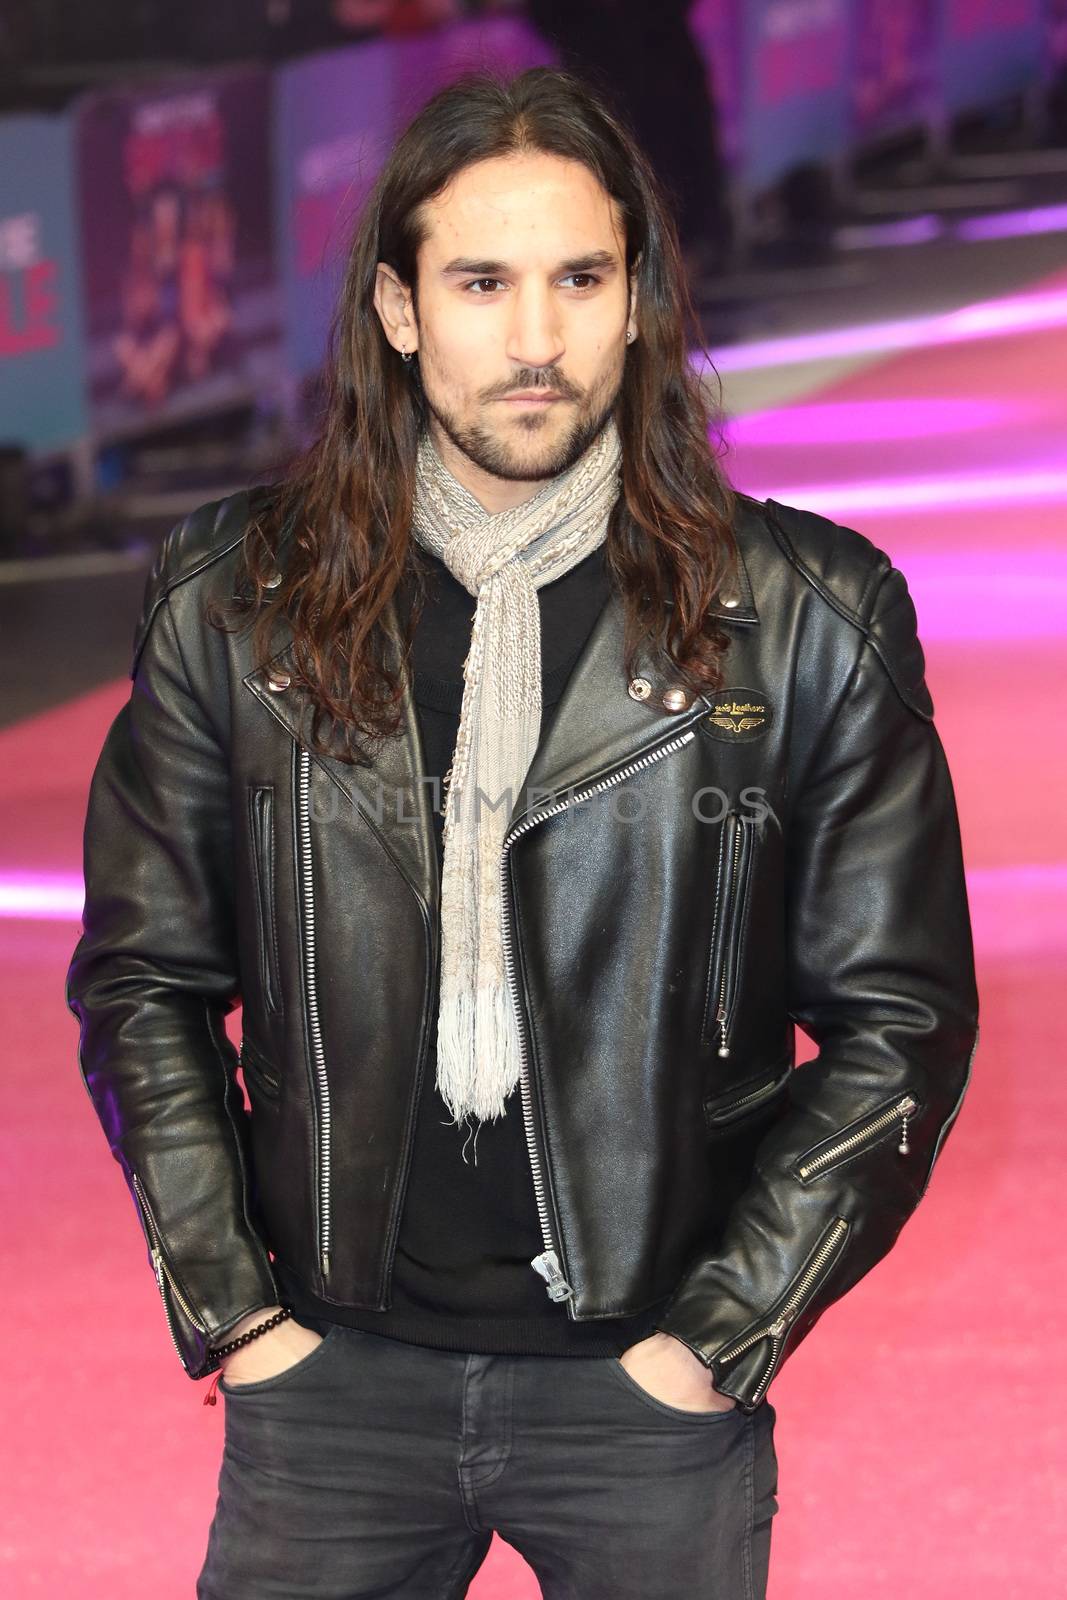 UK, London: Pete Wicks is pictured at How to be single European film premiere at Leicester Square, London on February 9, 2016.